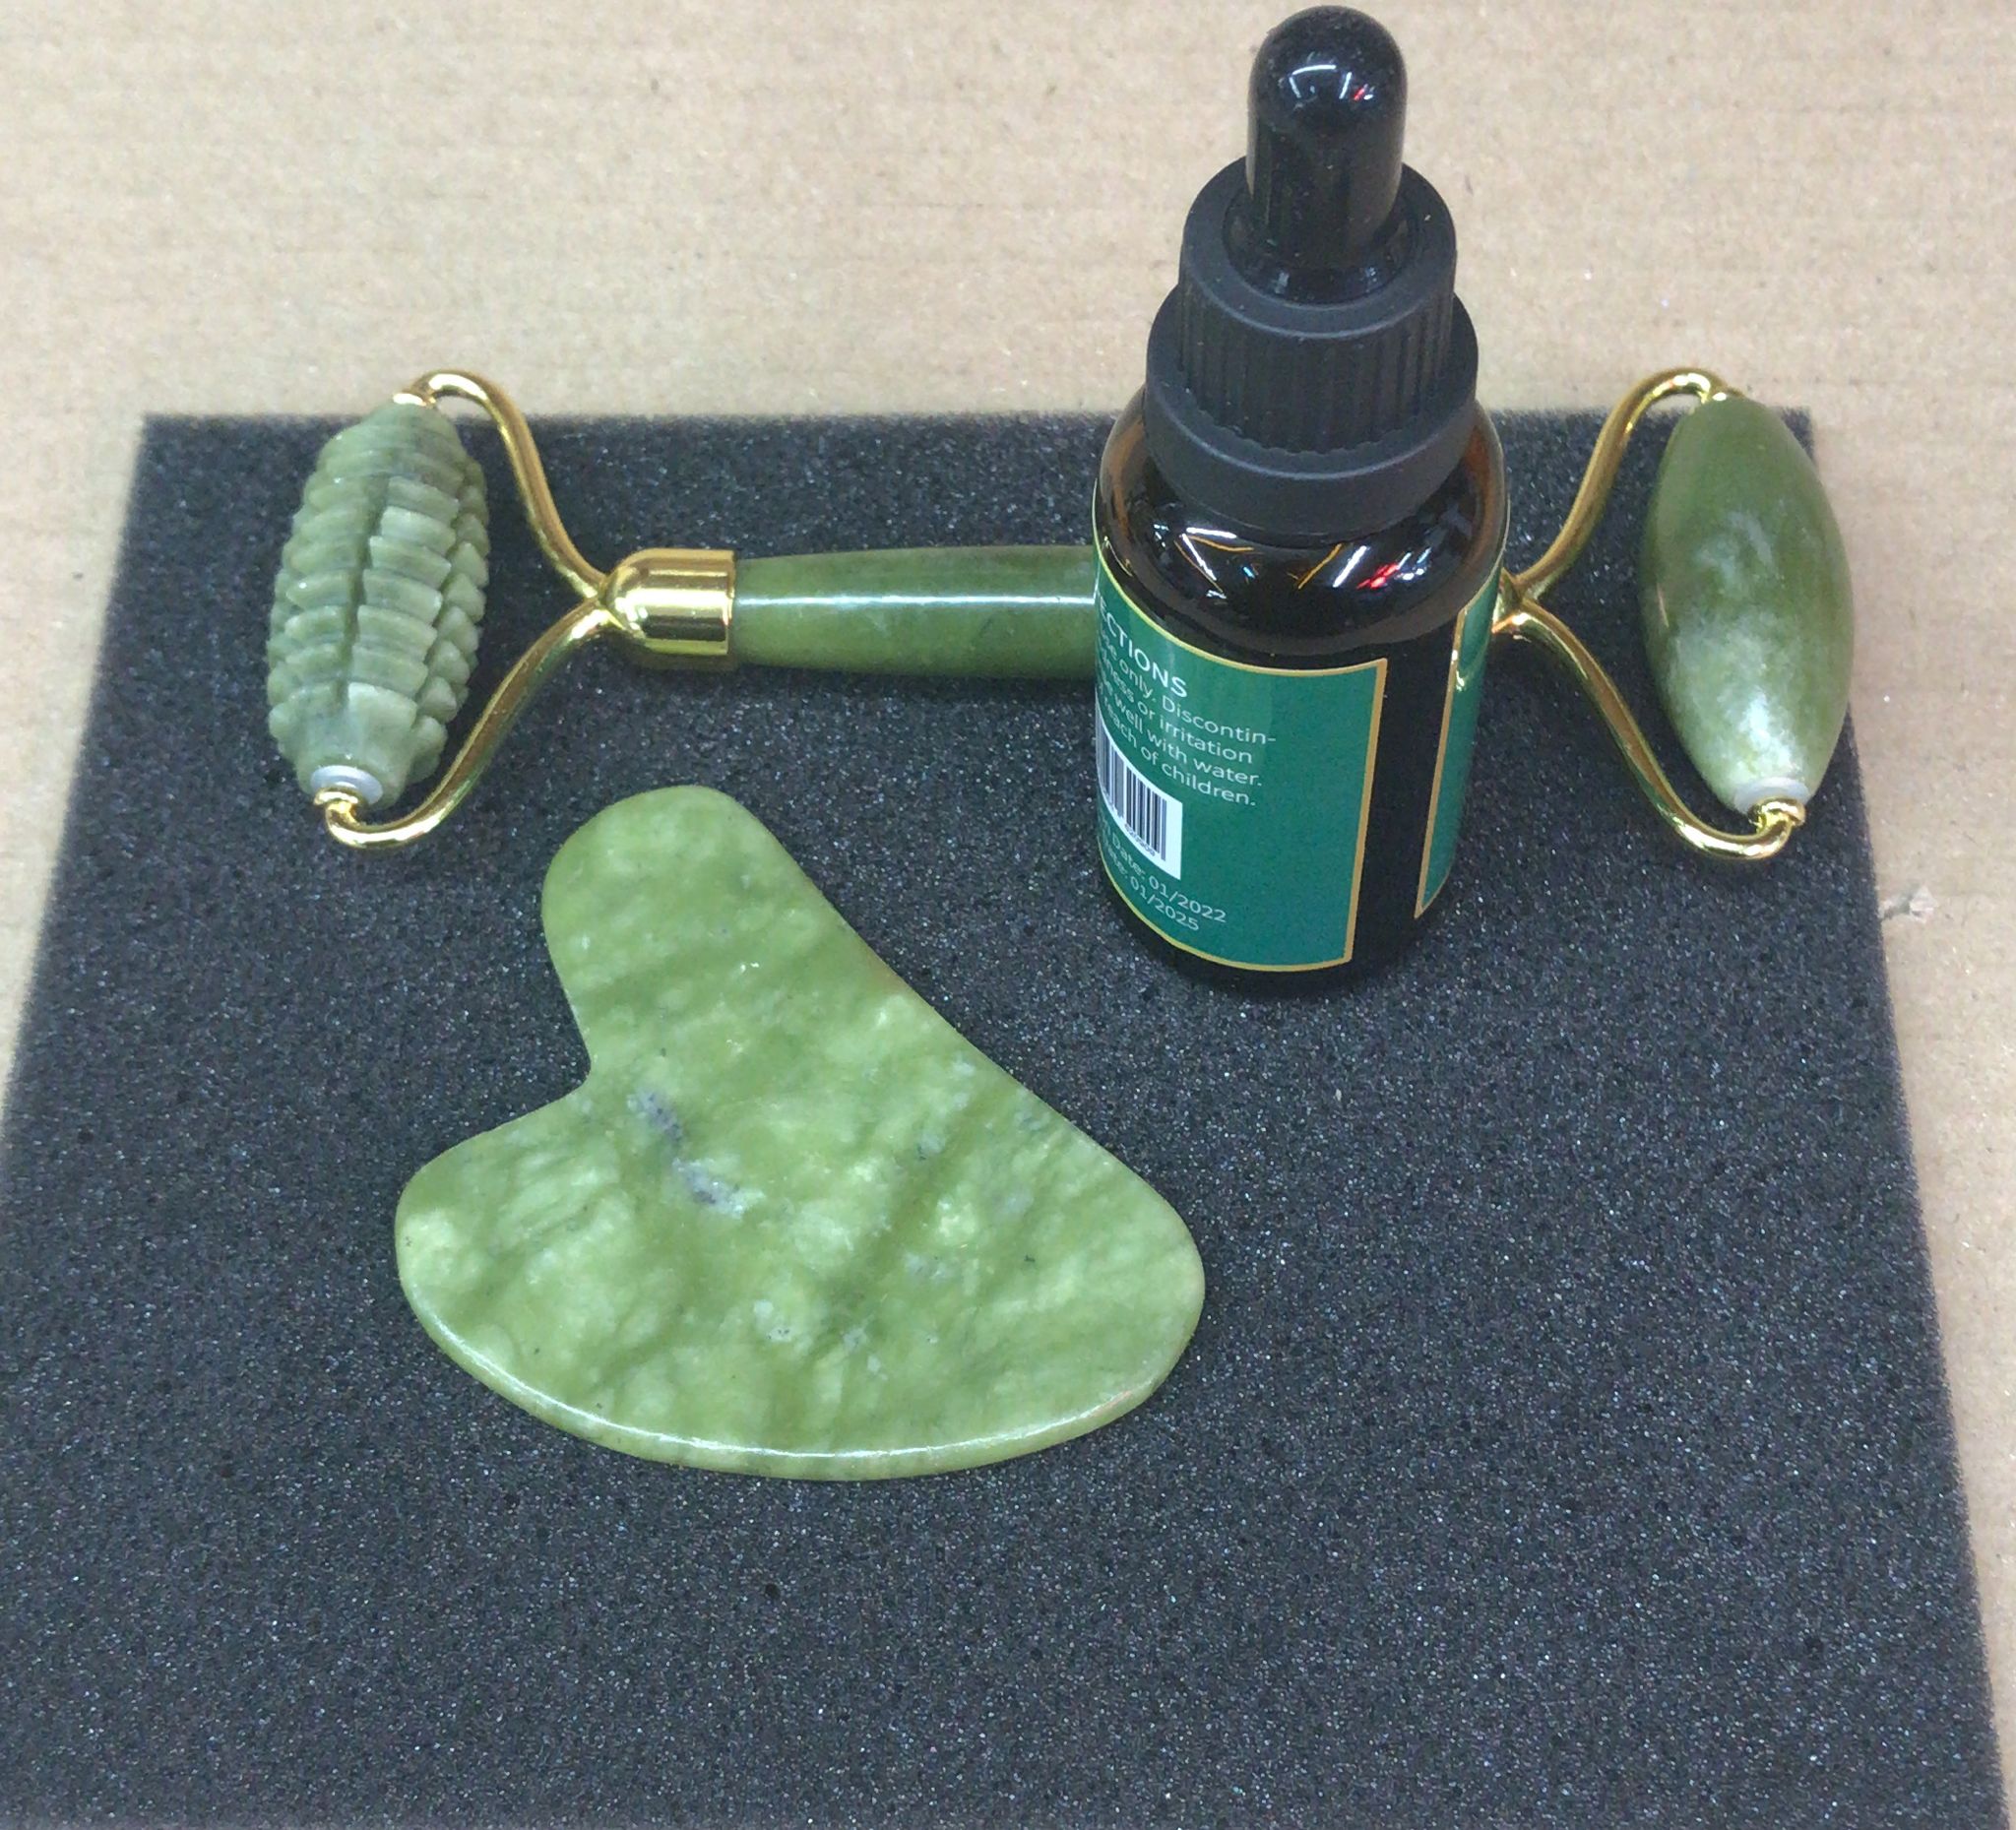 100% Natural Jade Stone Roller and Gua Sha Set with Vitamin C Serum | Great for Eye Puffiness Treatment, Skin Tightening, Anti Aging, Rejuvenate Face & Neck | Beauty Gift for Women (Green)-7651